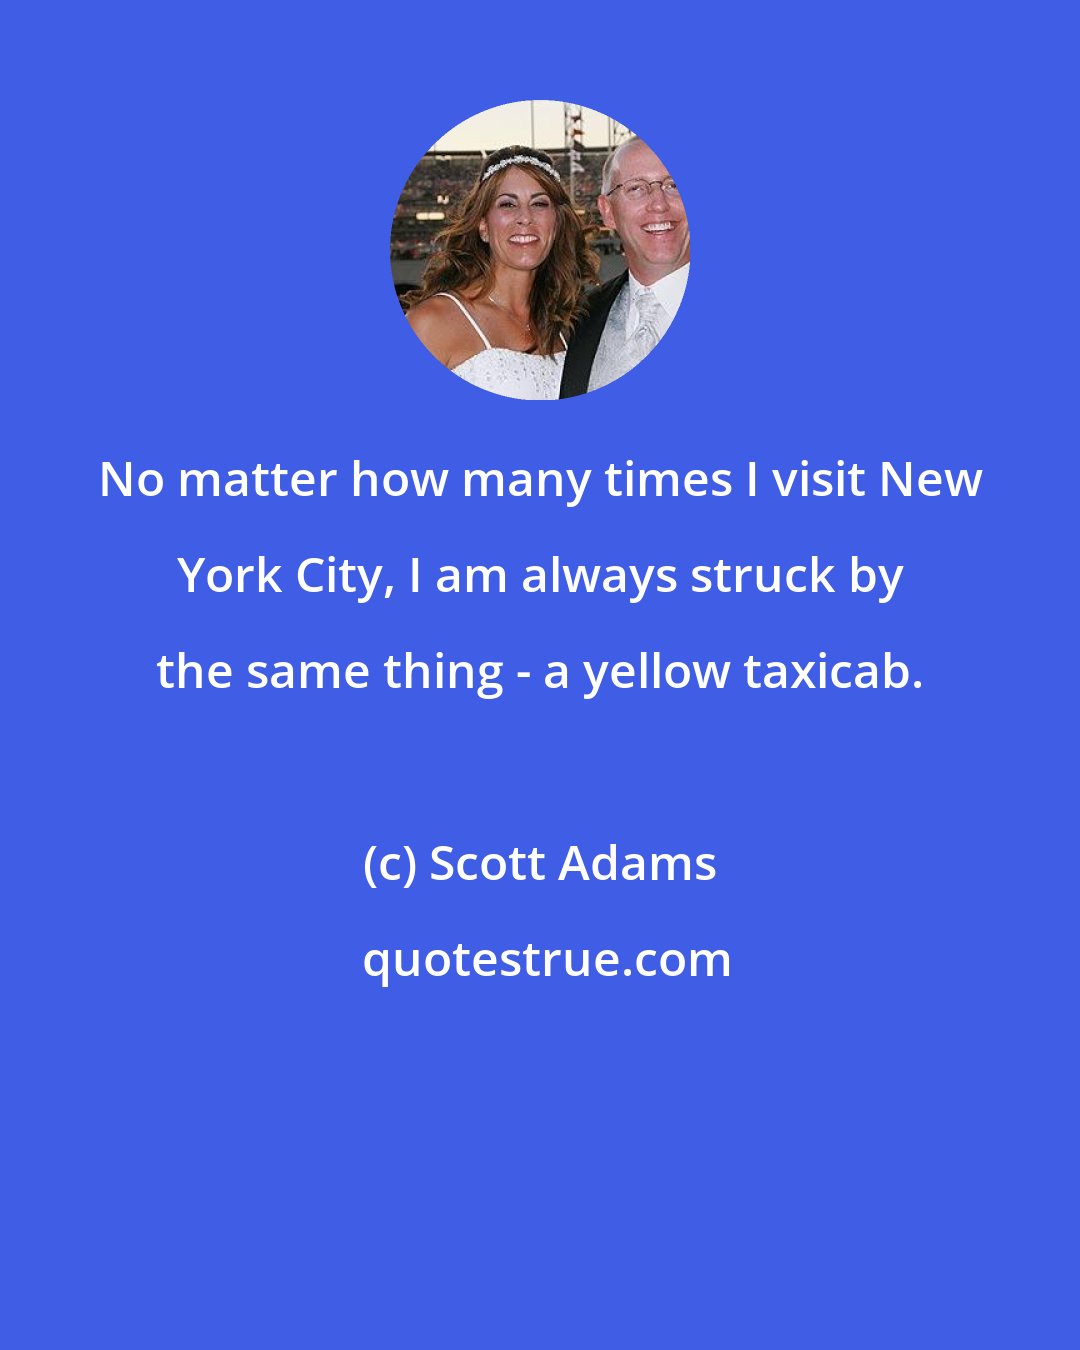 Scott Adams: No matter how many times I visit New York City, I am always struck by the same thing - a yellow taxicab.